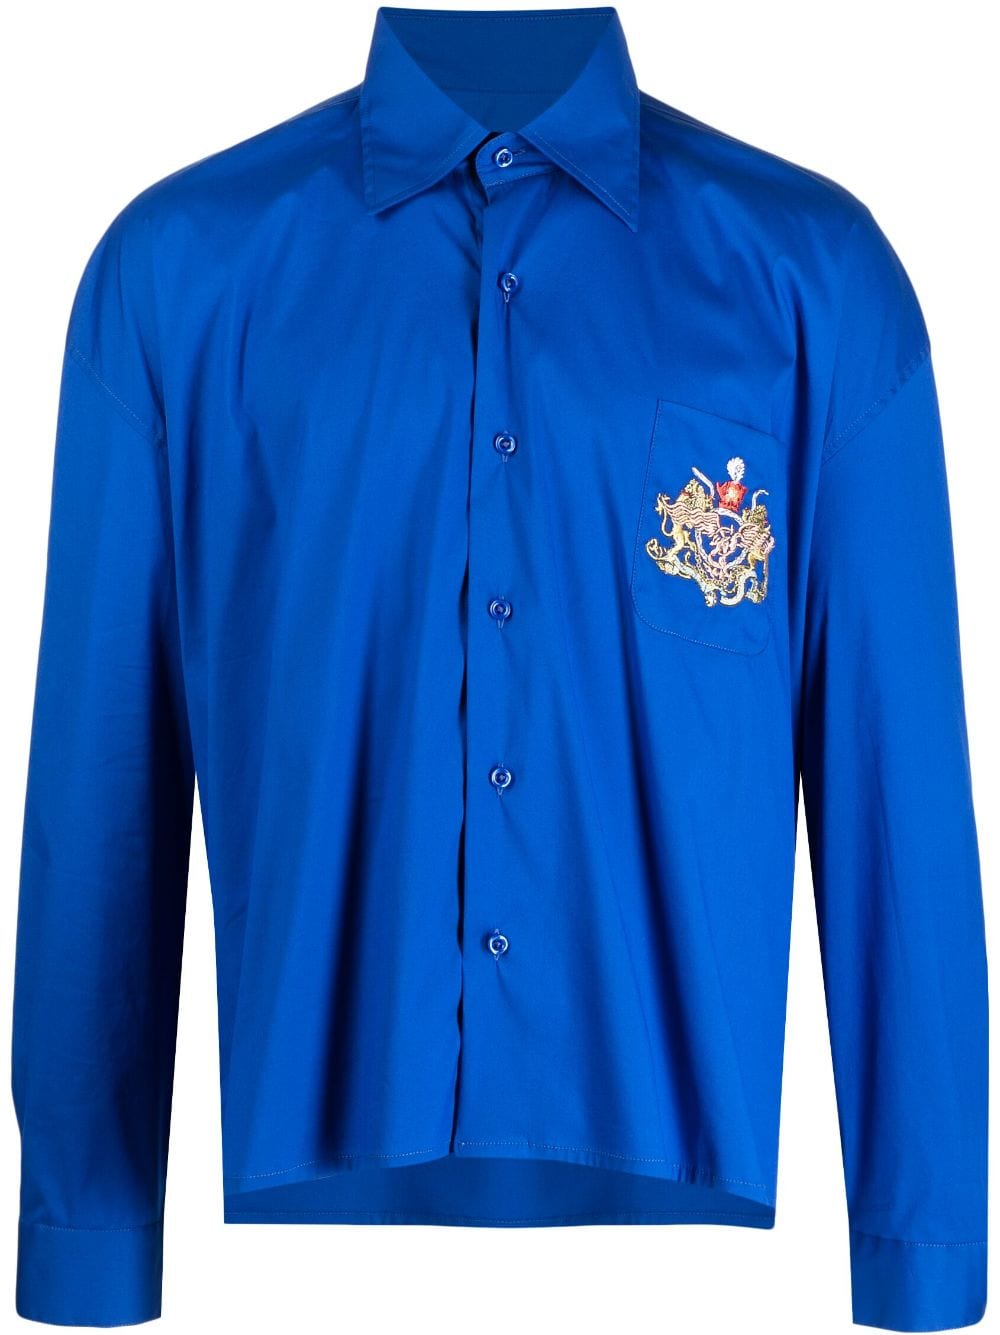 Liberal Youth Ministry embroidered long-sleeve shirt - Blue von Liberal Youth Ministry